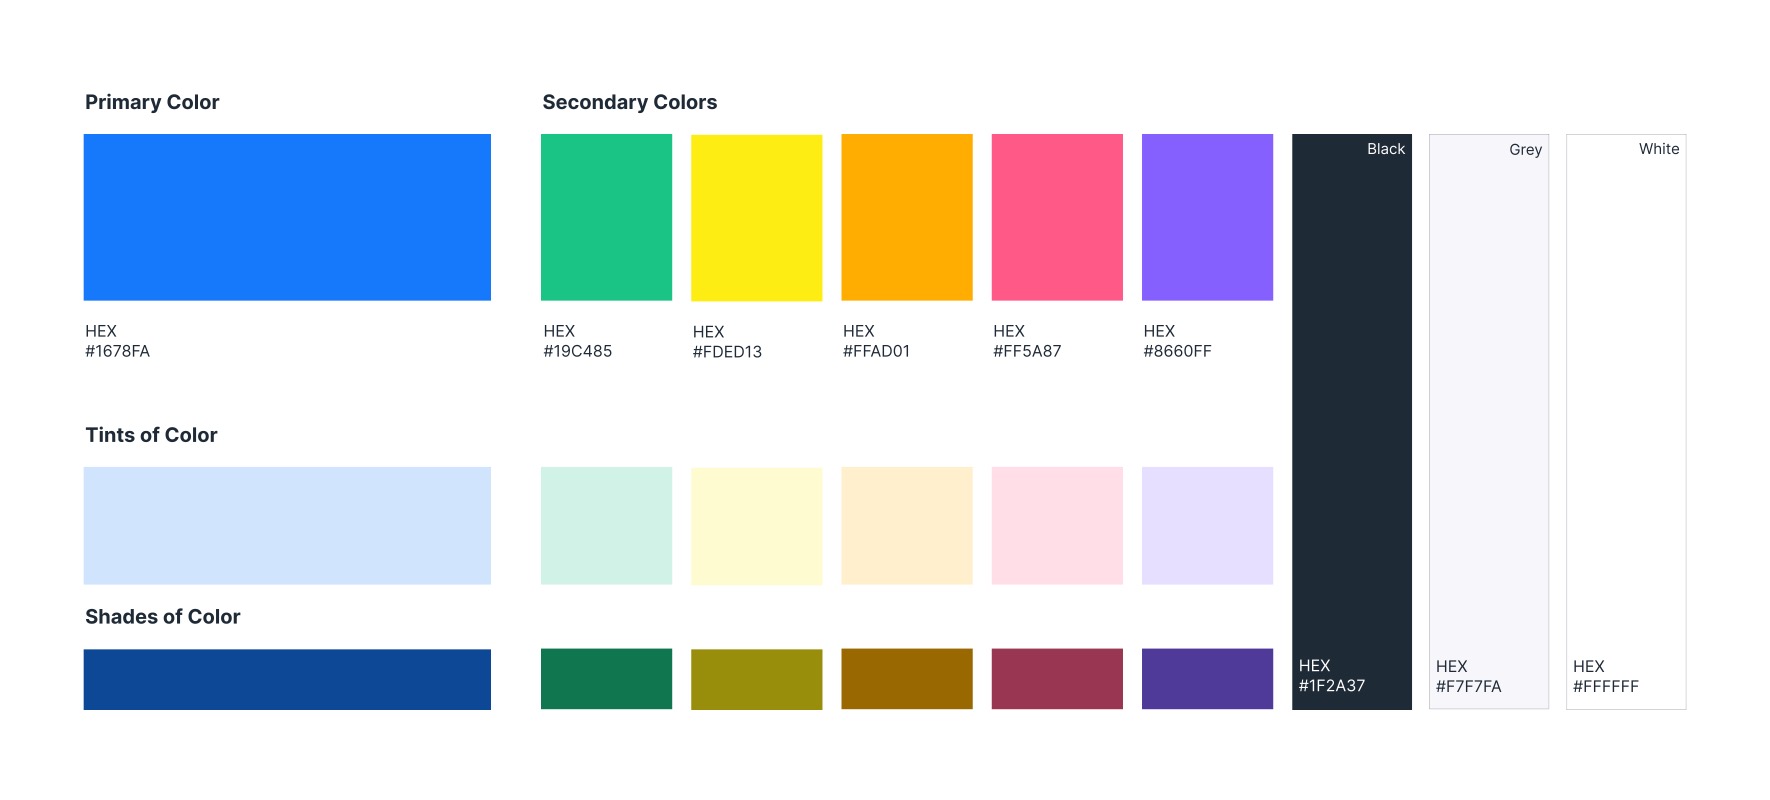 Color panel showing the primary color, secondary colors along with tints and shades of color